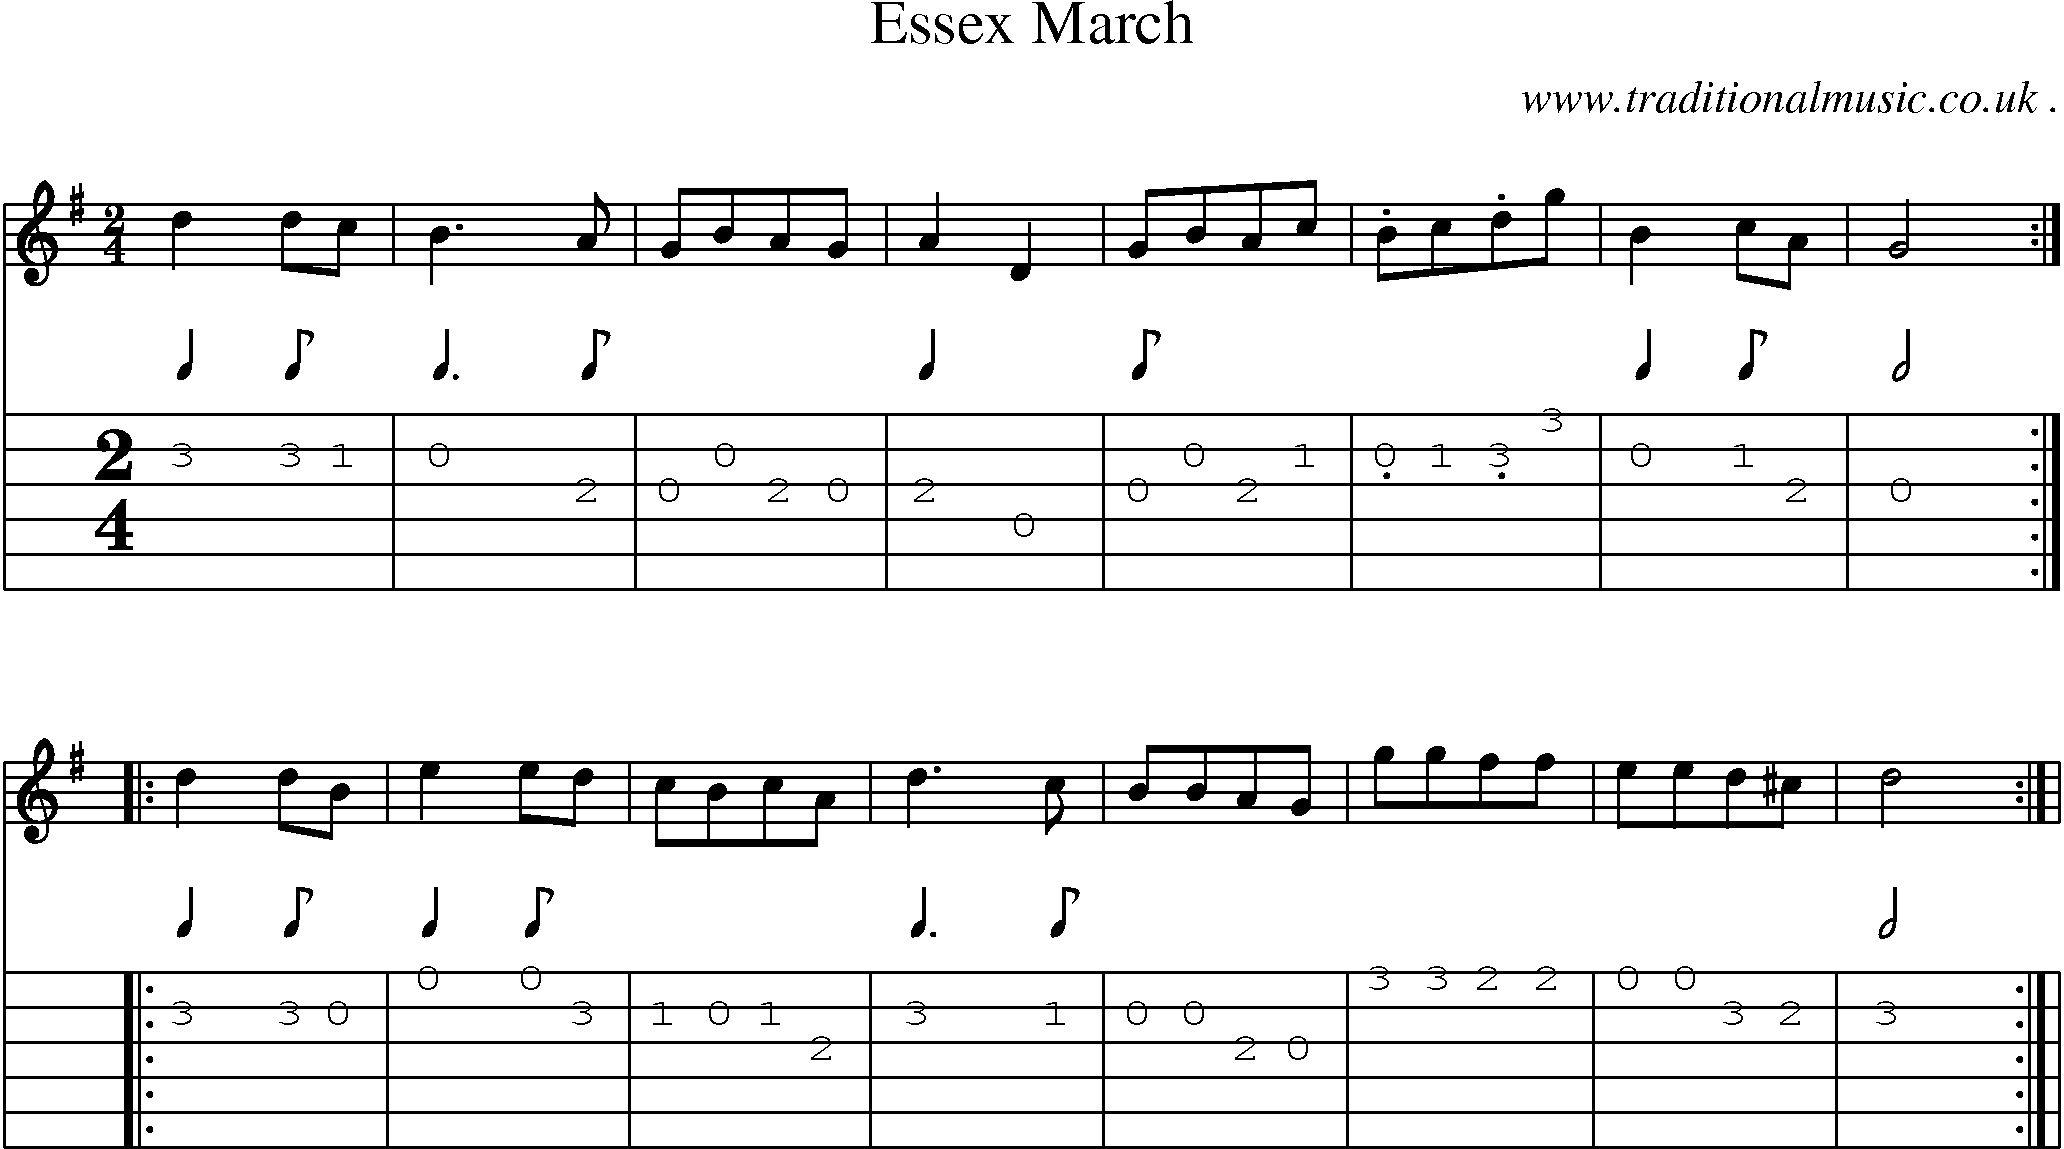 Sheet-Music and Guitar Tabs for Essex March